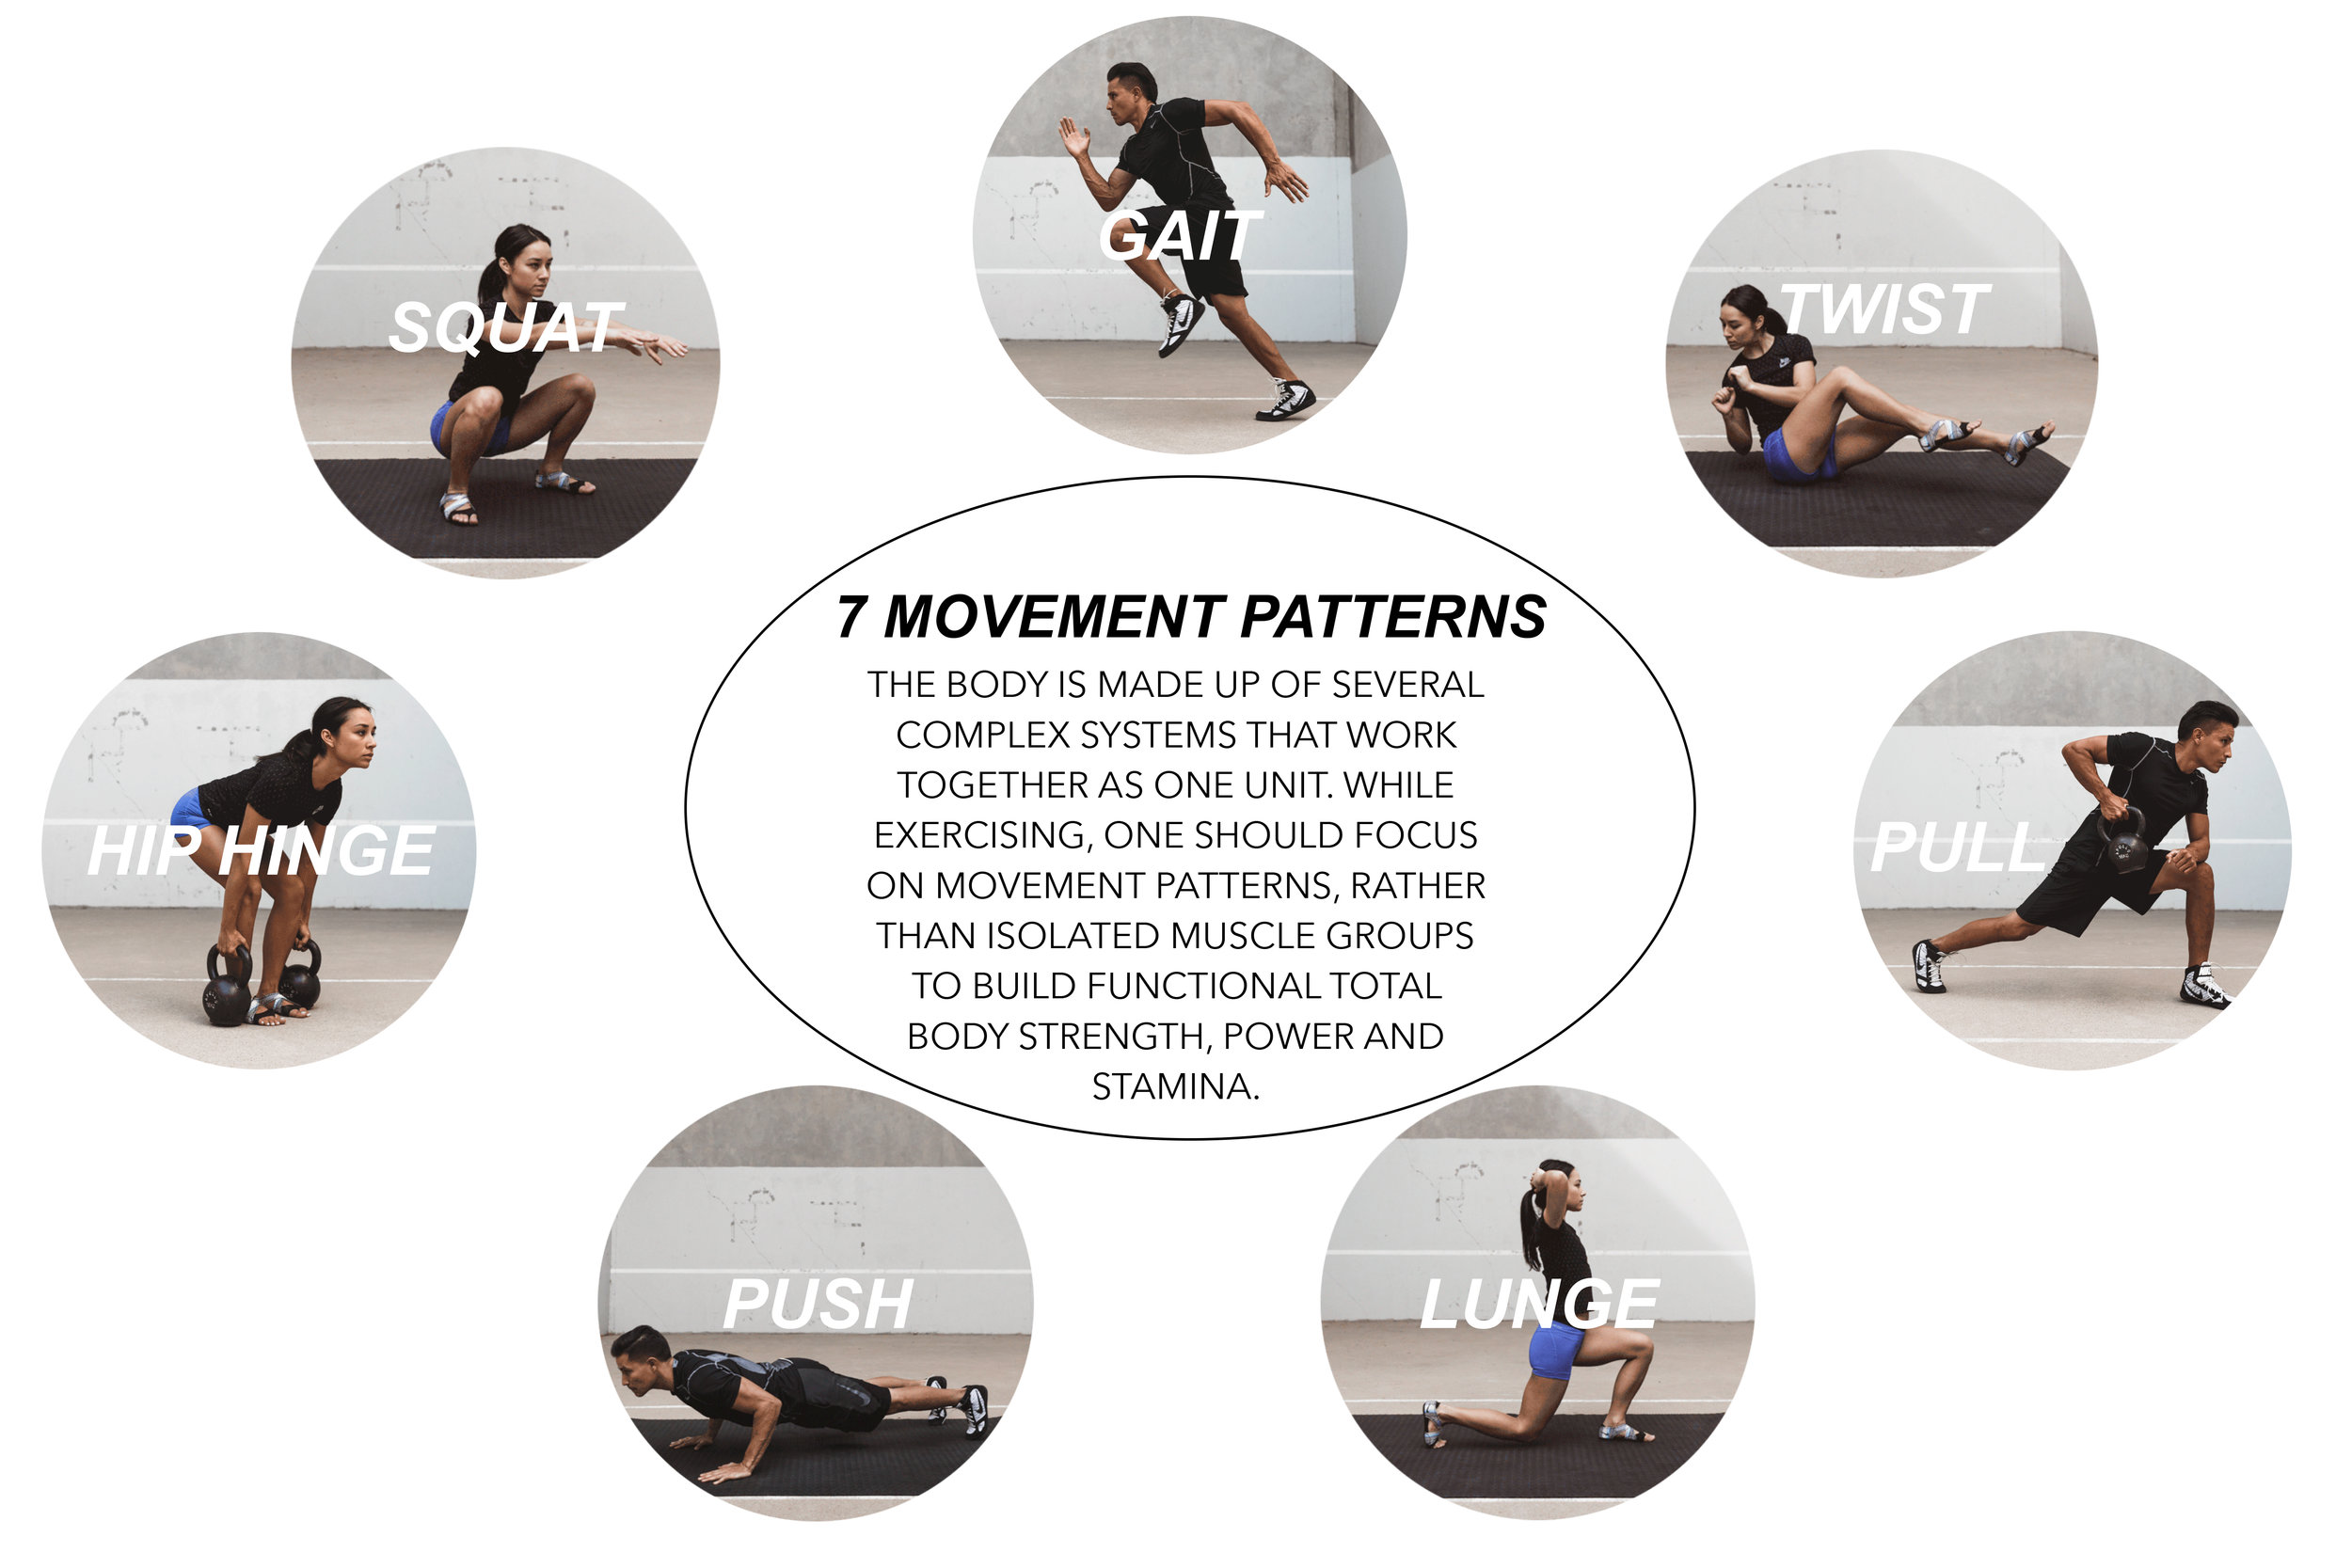 IV. Benefits of Incorporating Functional Movement Patterns in Your Workout Routine